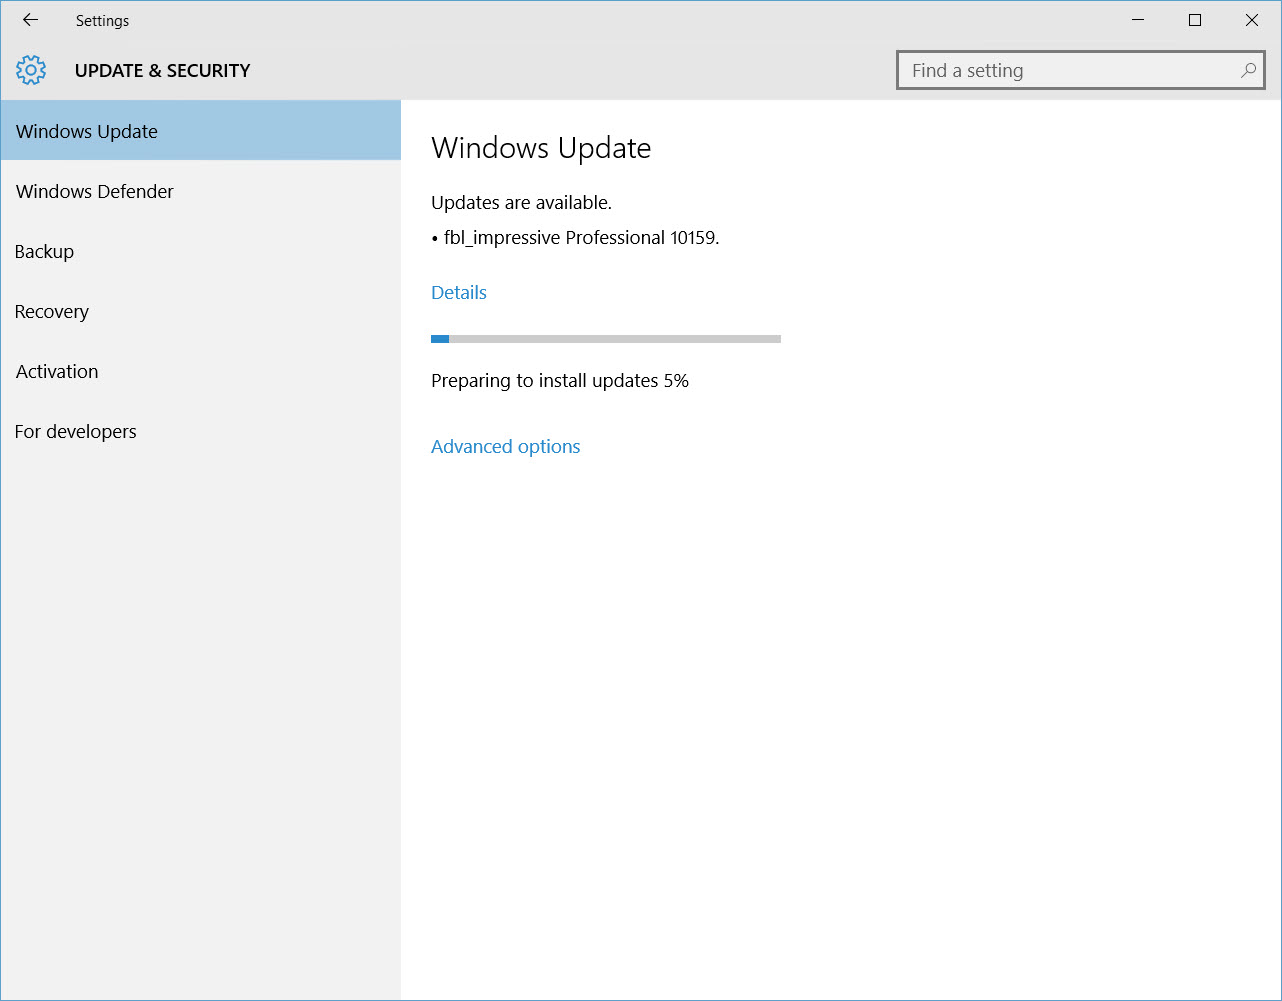 Upgrading to Windows 10 build 10159 (Image Credit: Russell Smith)